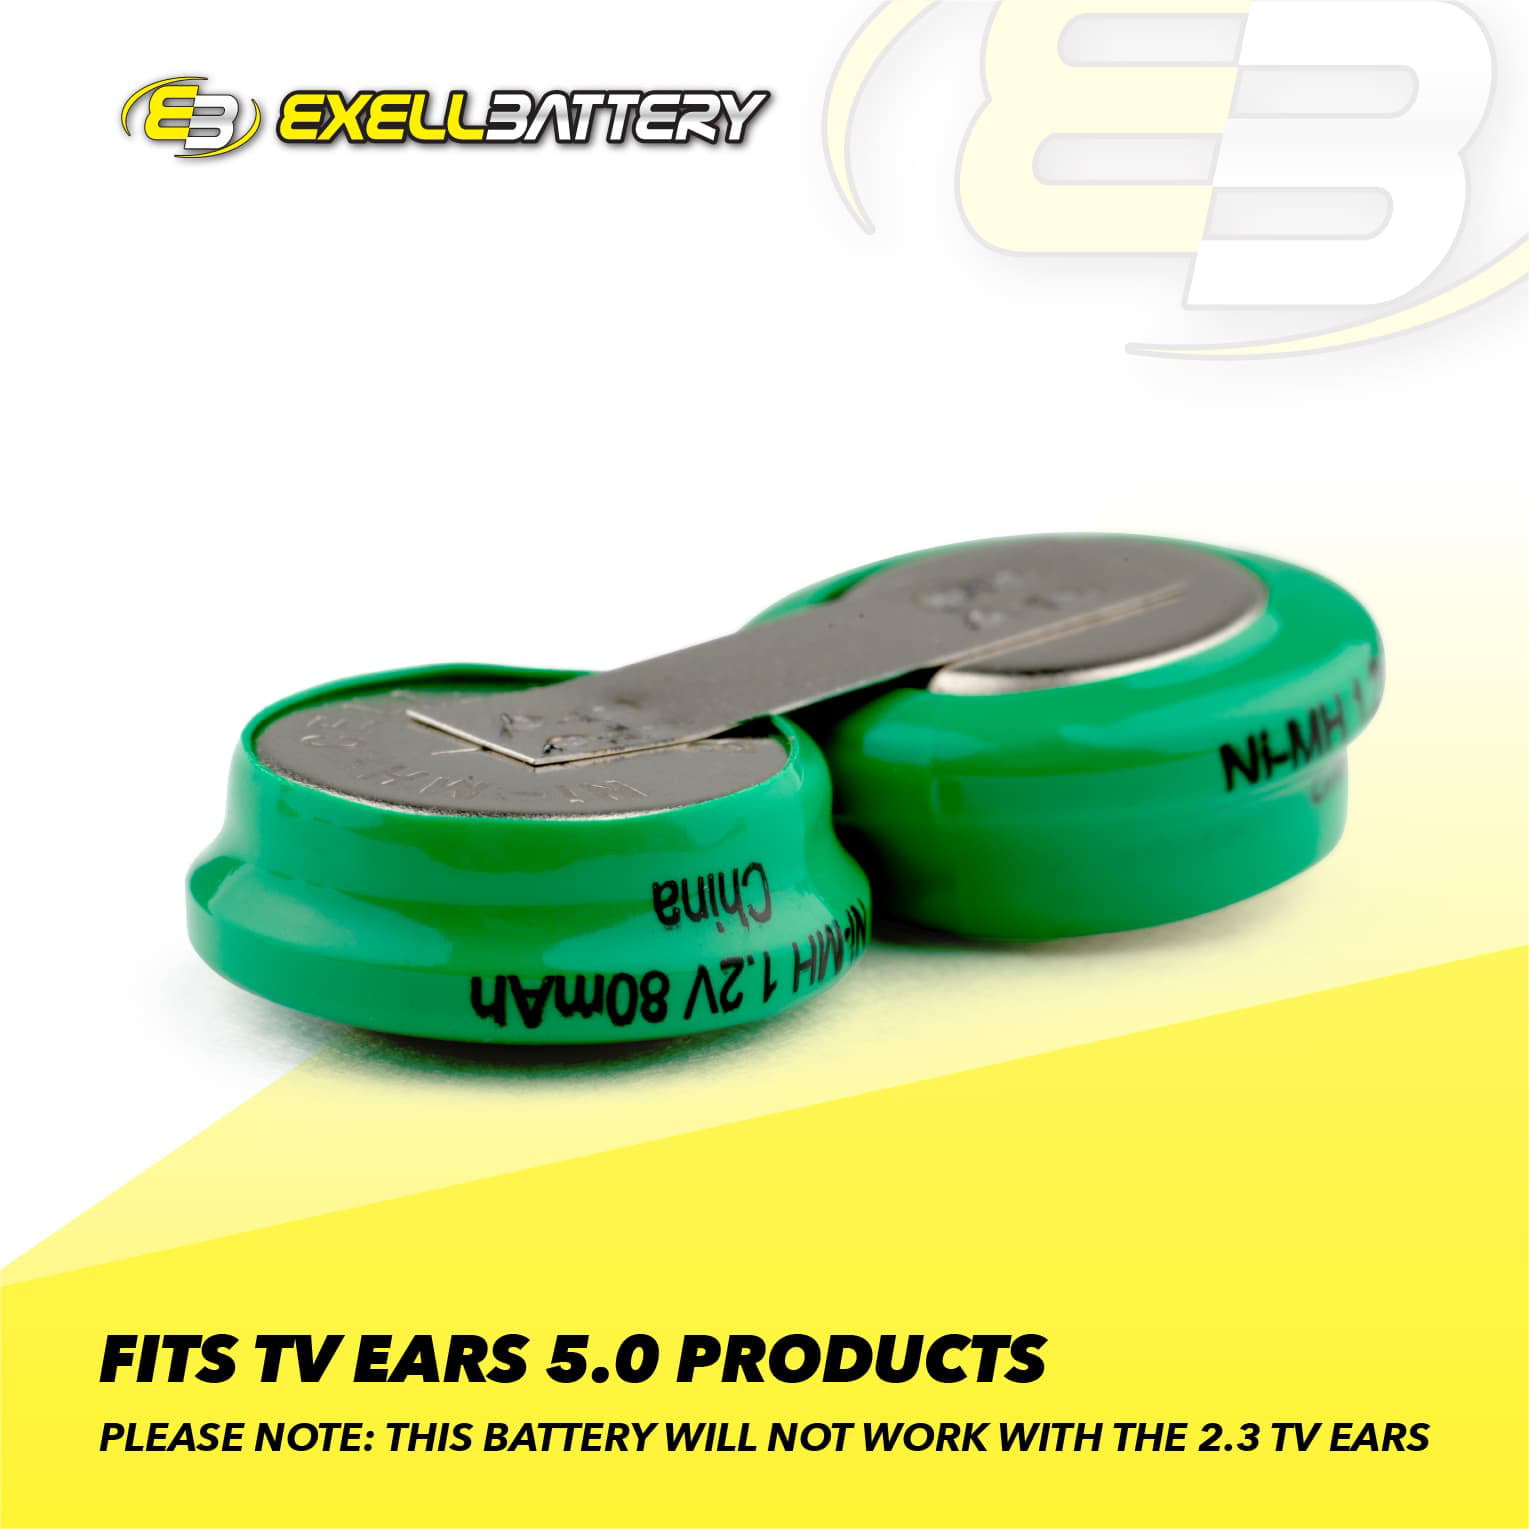 Exell 2.4-Volt Nickel Metal Hydride Battery Batteries for TV Ears 40810 Fits 5.0 TV Ears Digital Wireless Headsets |Assembled in The USA| EBHS-TVEARS 2-Pack 